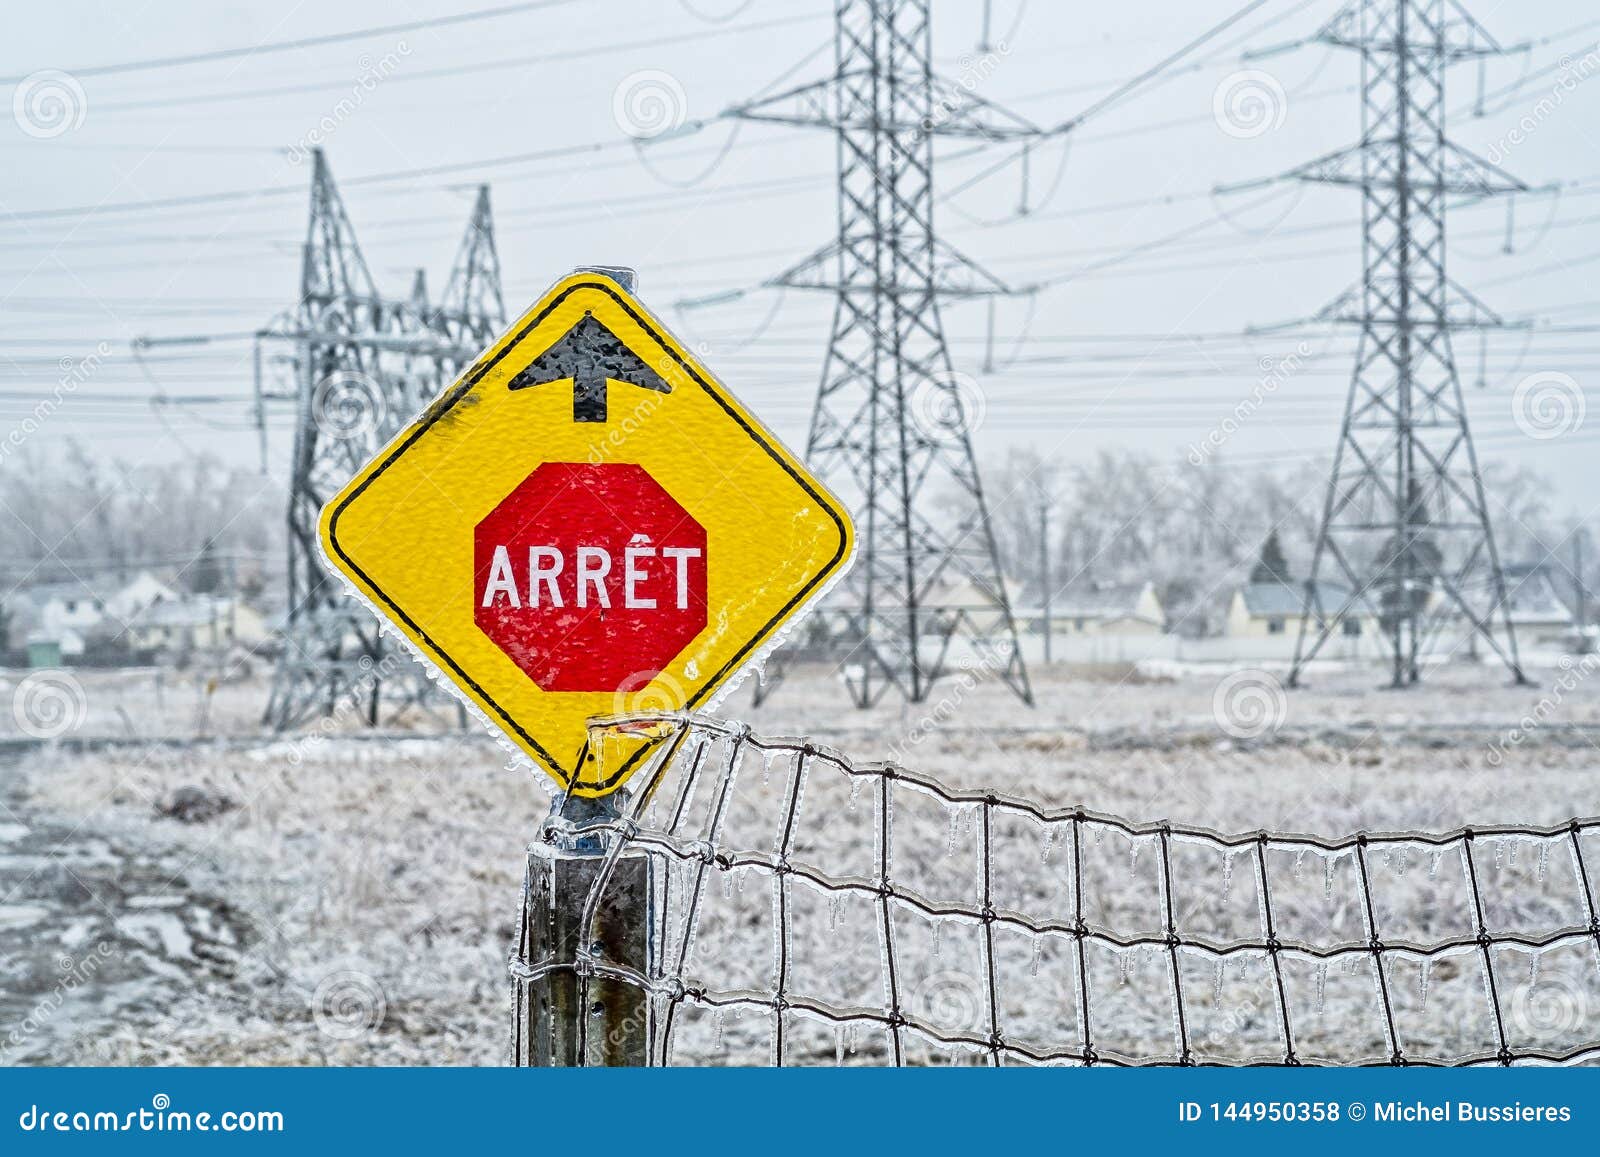 electrical power field with freezing rain